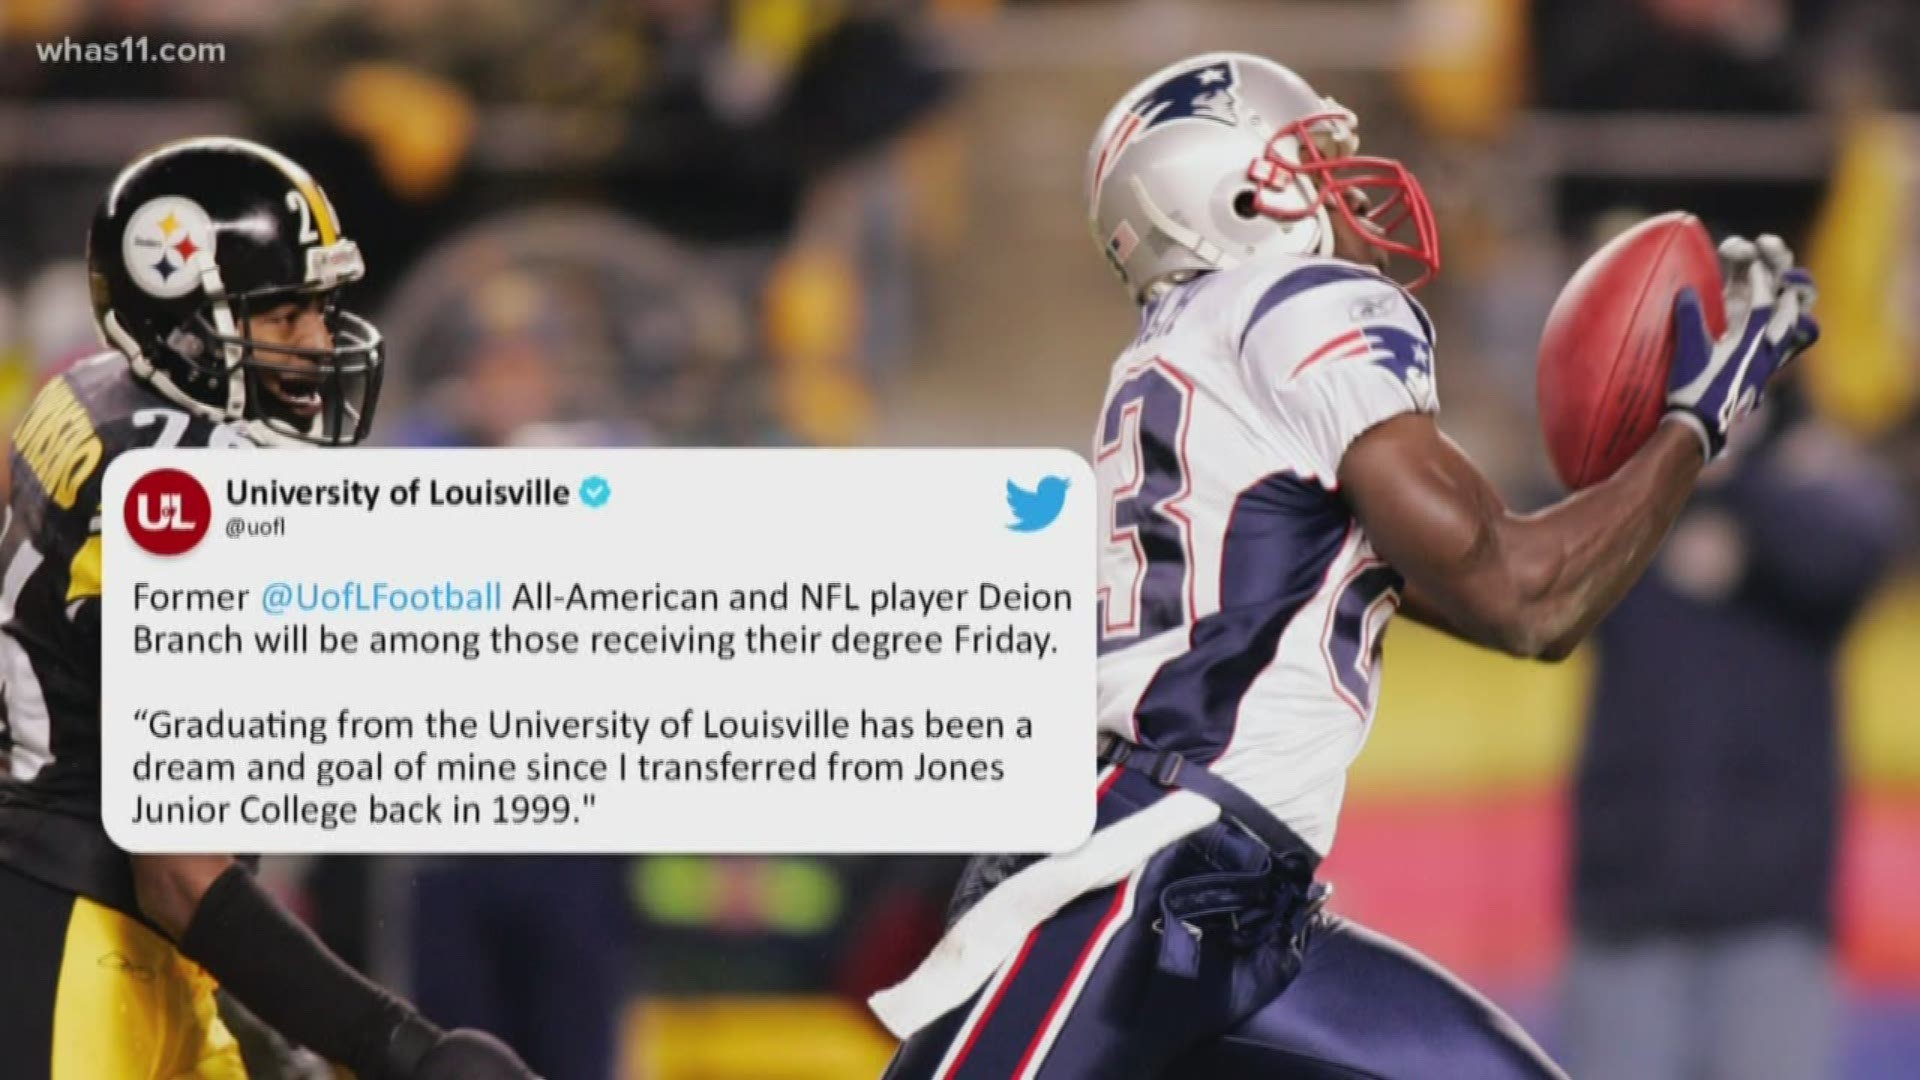 Super Bowl champion Deion Branch will earn his degree after leaving Louisville more than 18 years ago.